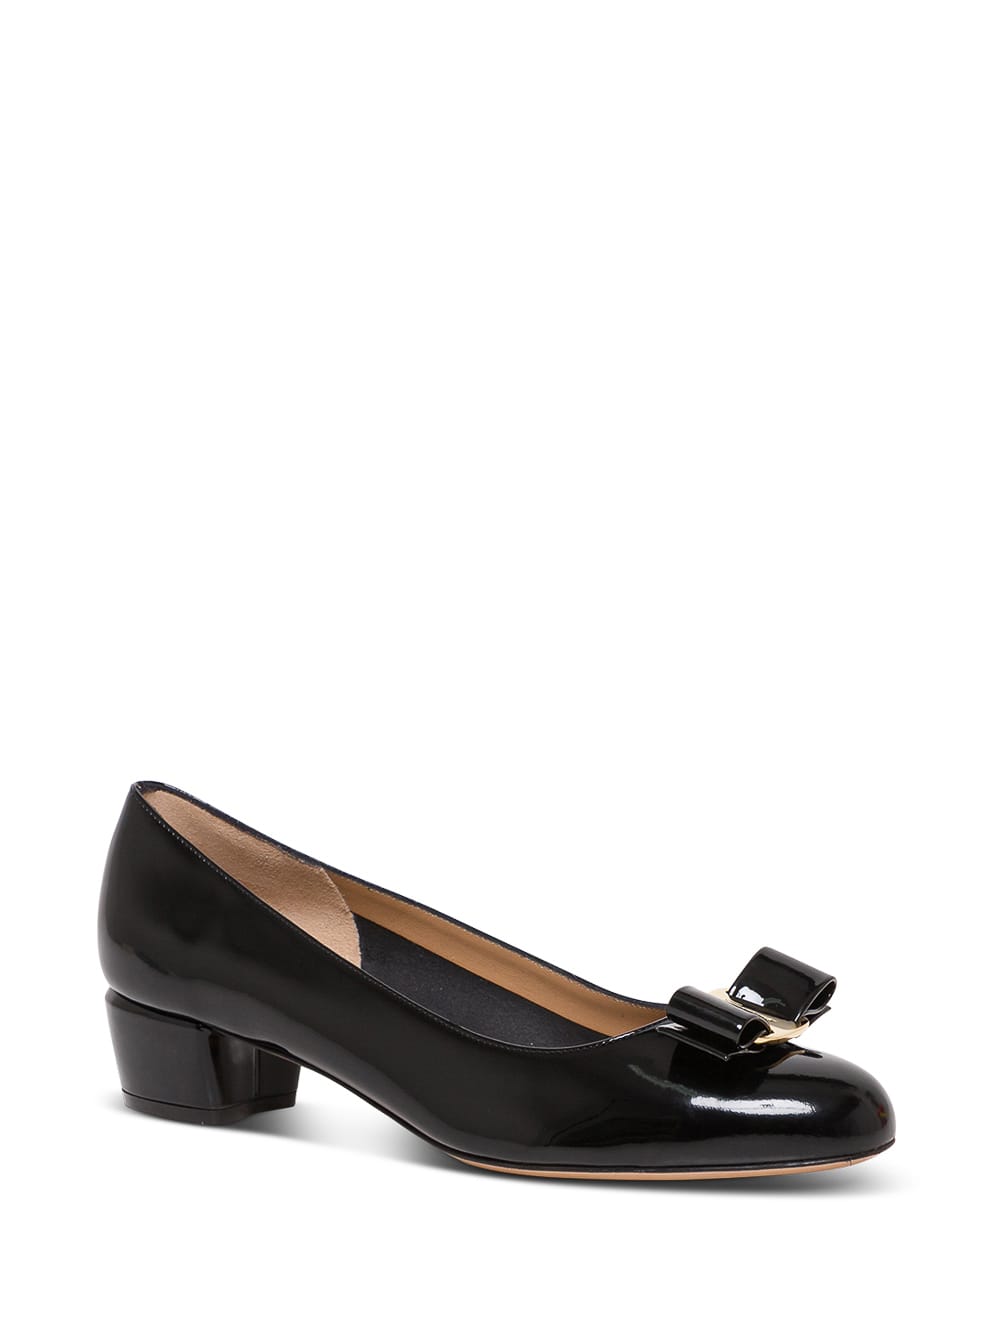 Shop Ferragamo Vara Pumps In Black Patent Leather With Bow